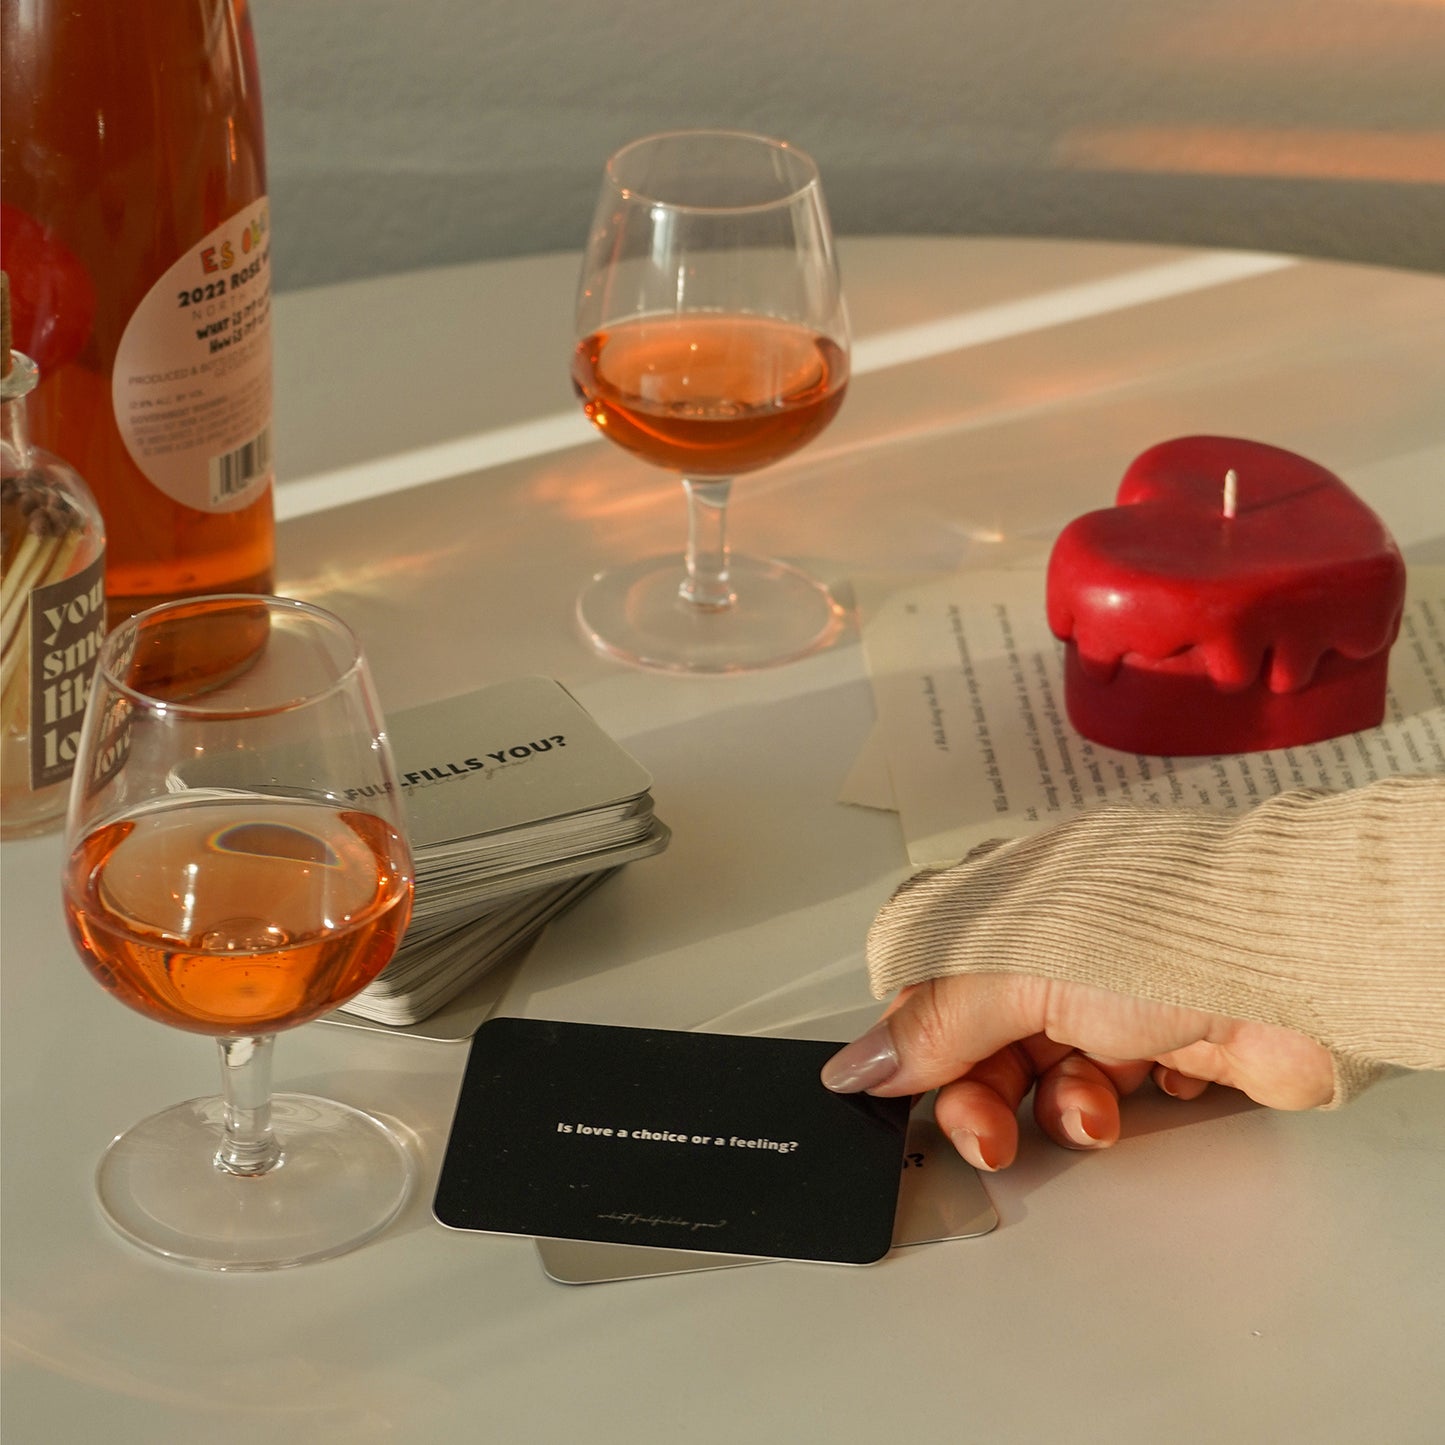 hand holding cards and red melting heart candle and matches on book pages, a glass of rose wine, and a bottle of rose on the white round table